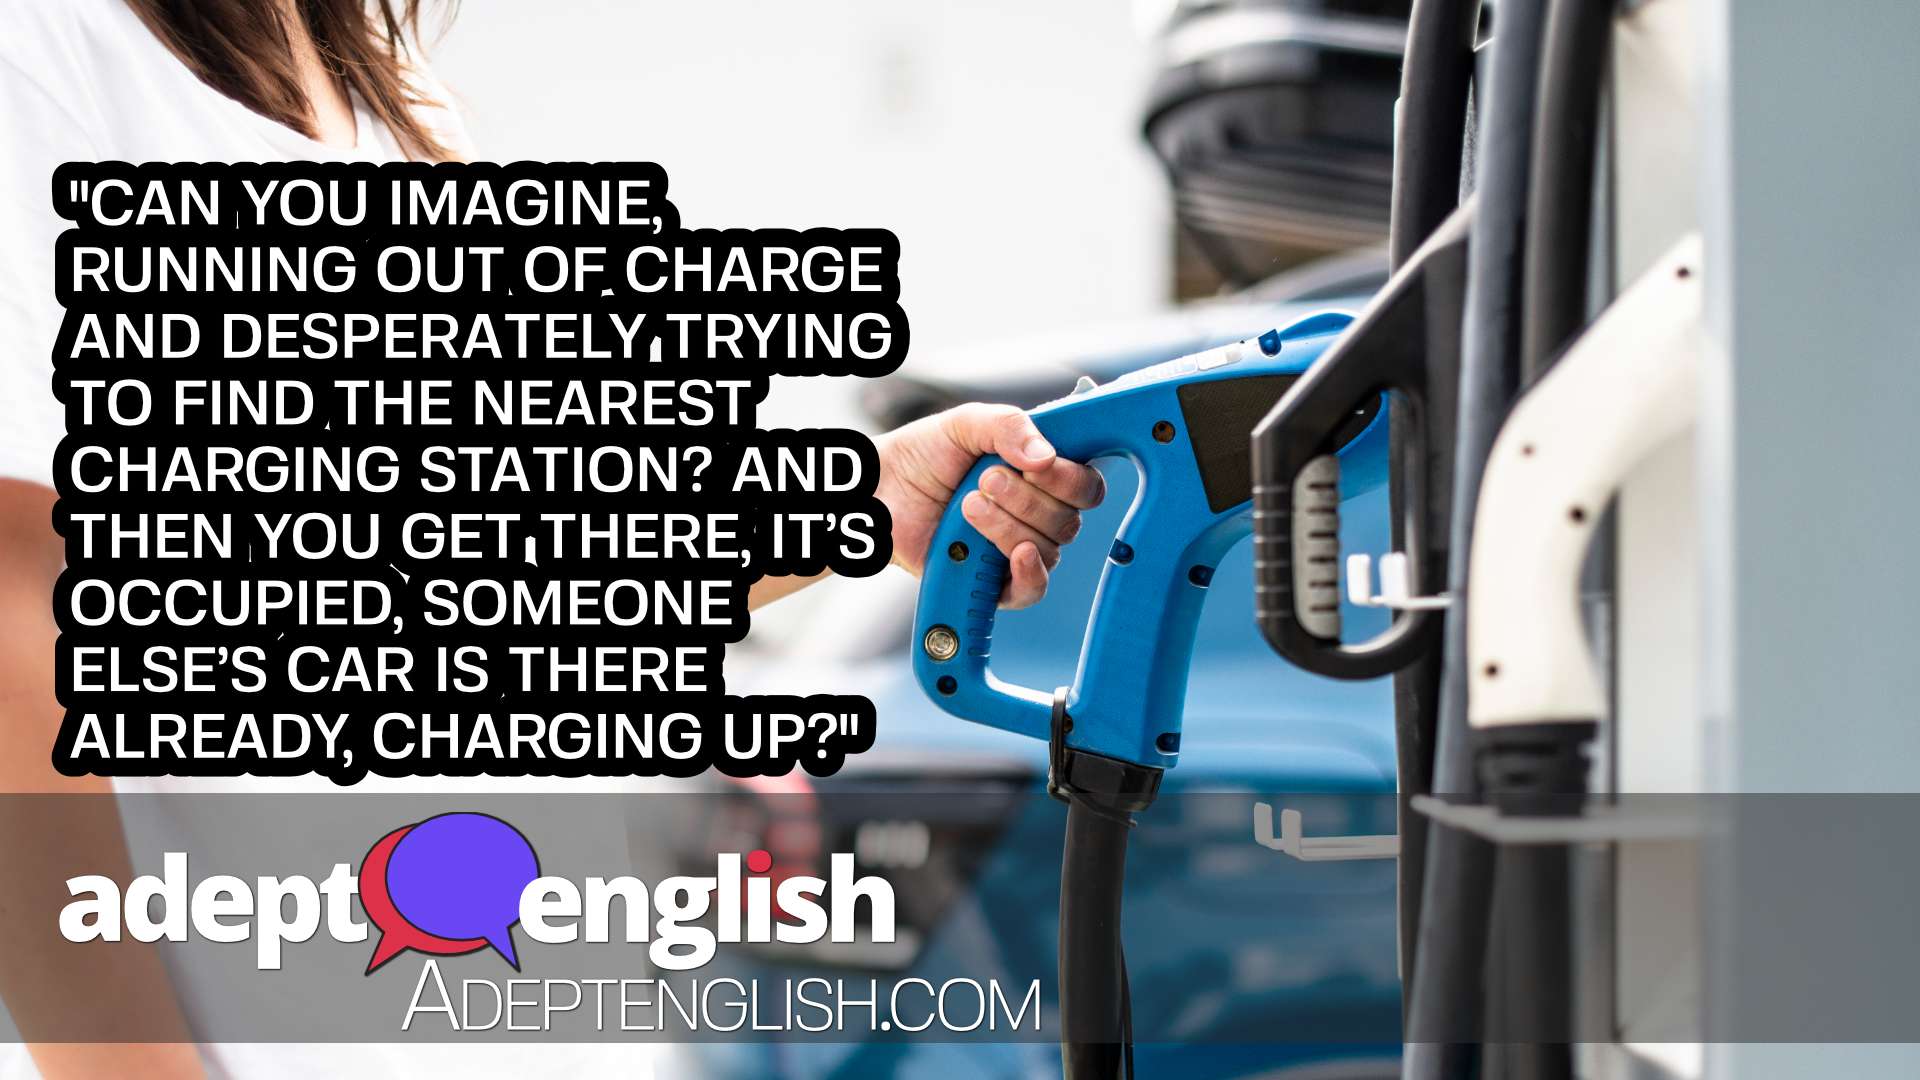 A photograph of a woman plugging her electric car into an electric charging point. Used to help highlight the length of charging times in the English lesson talking about electric cars in the UK.